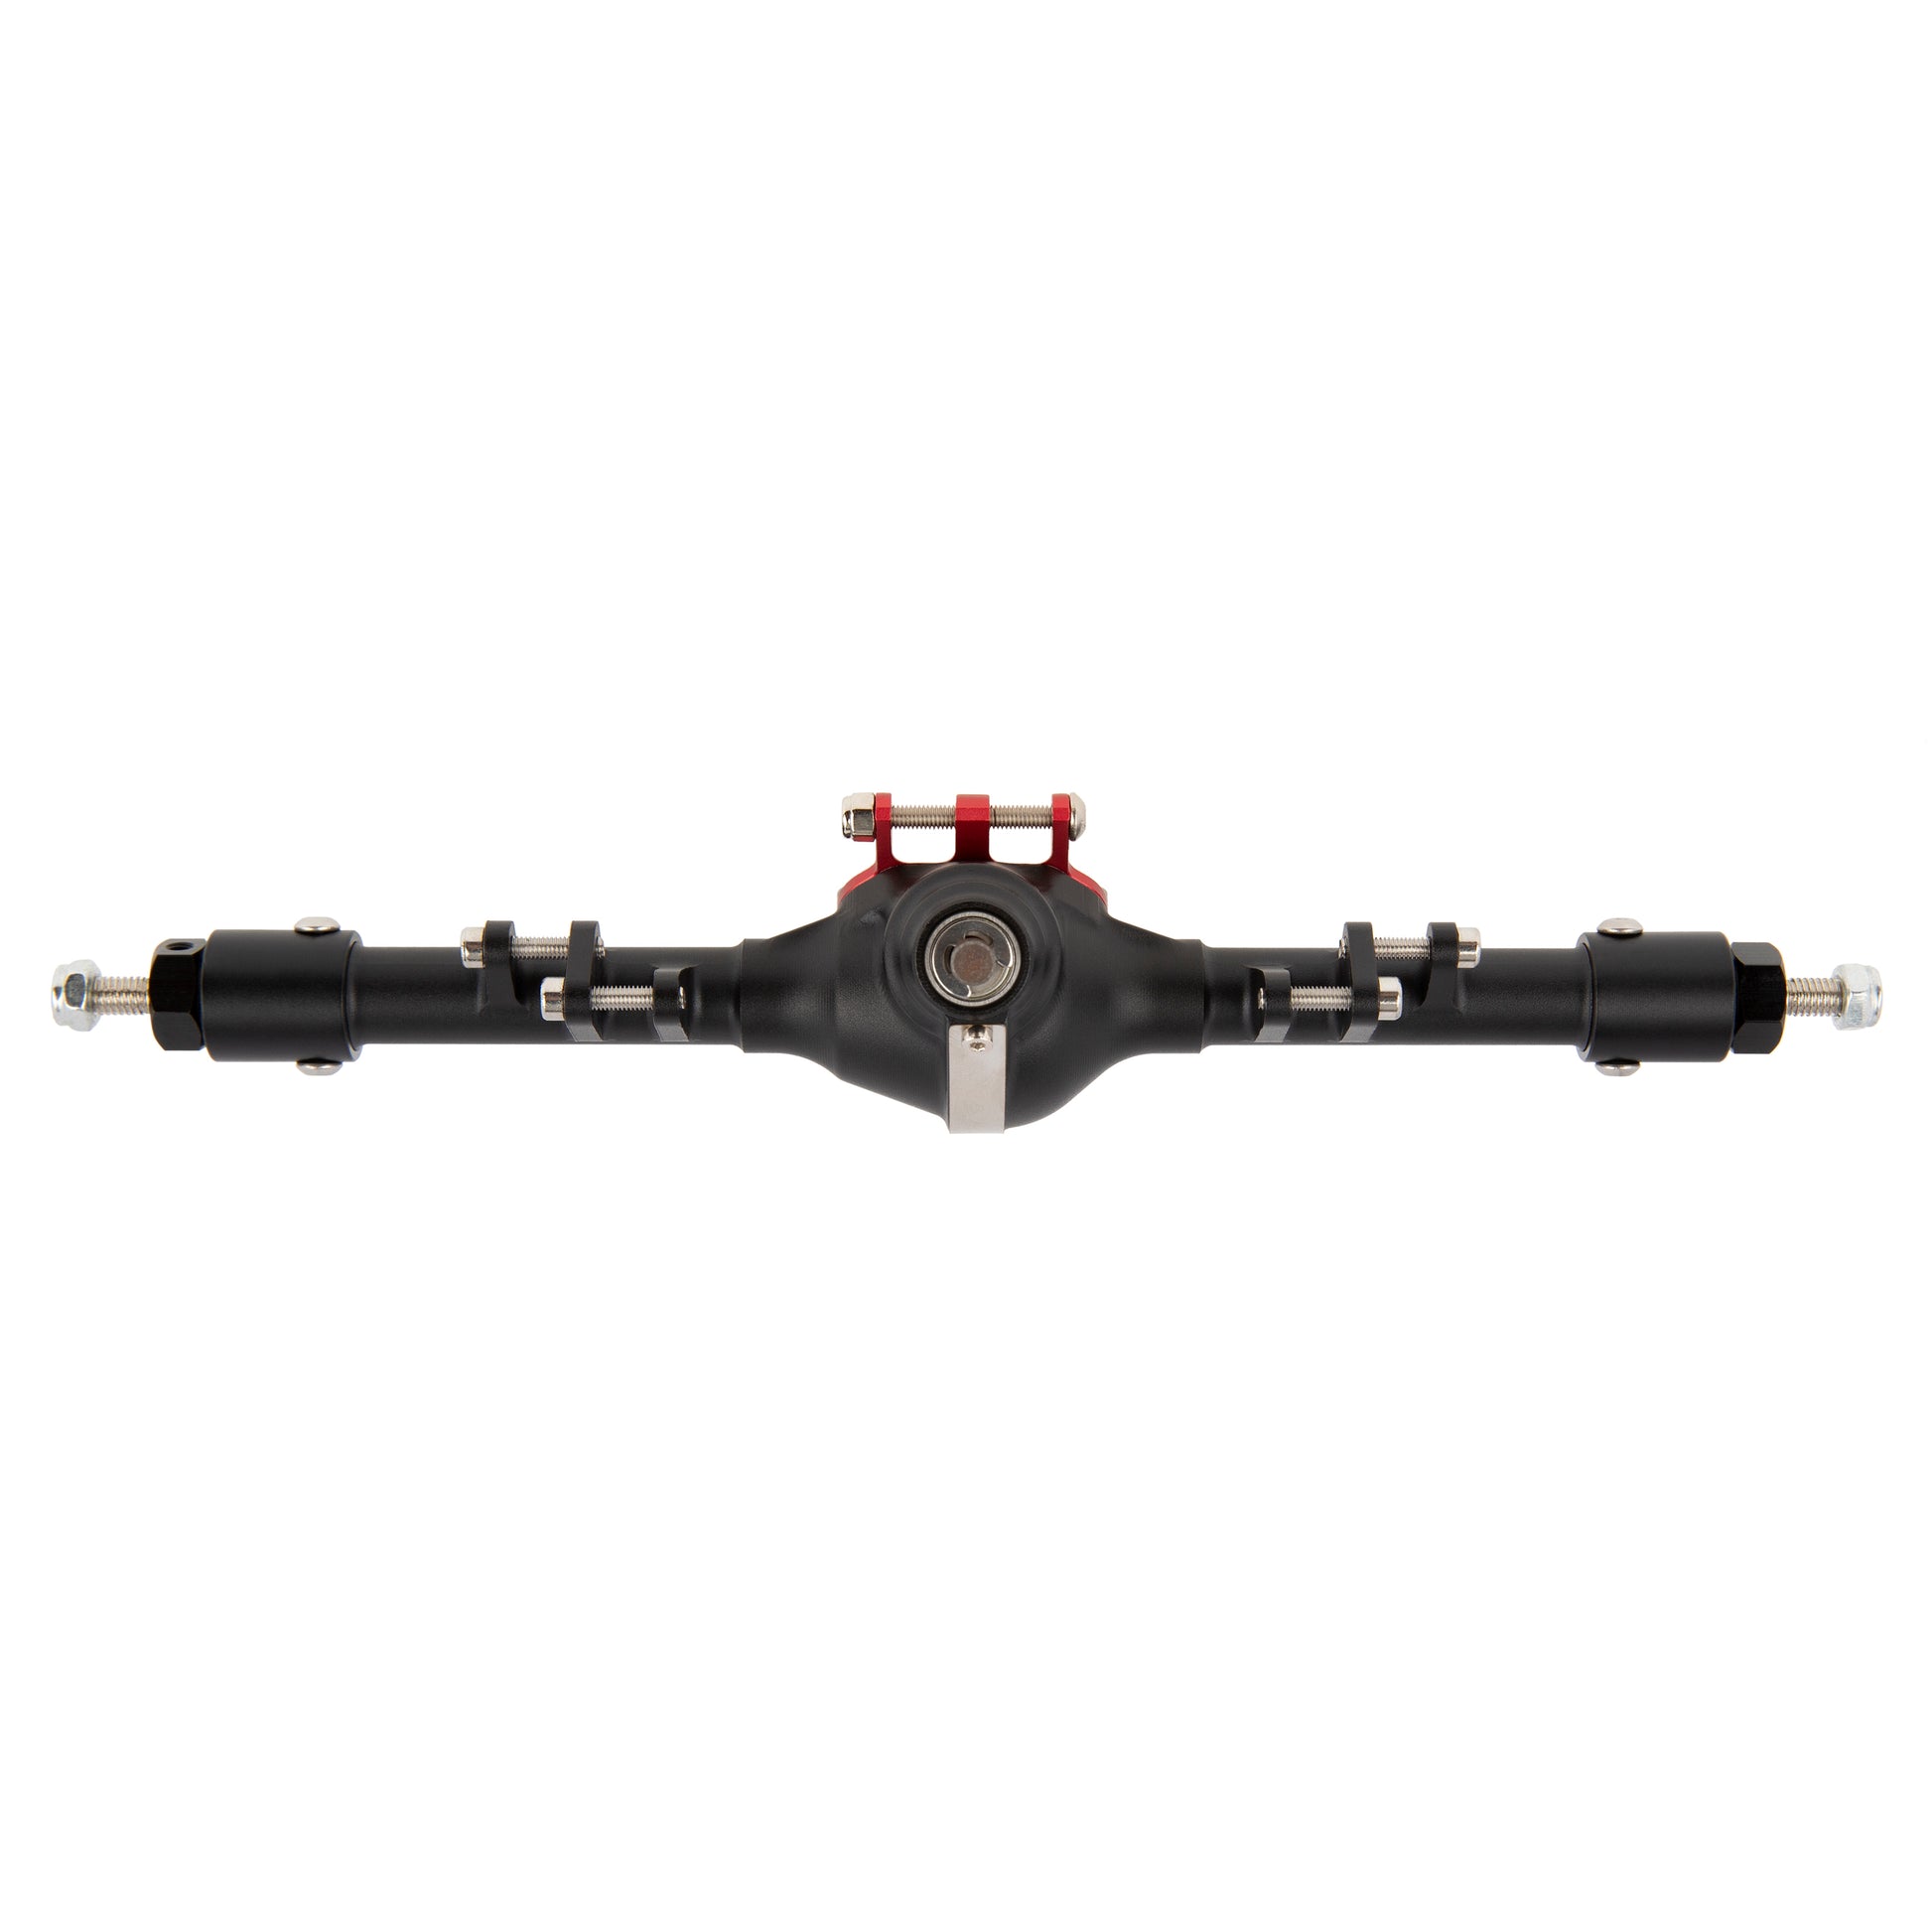 Metal Large Steering Integrated Axle Rear Axle for Axial SCX10